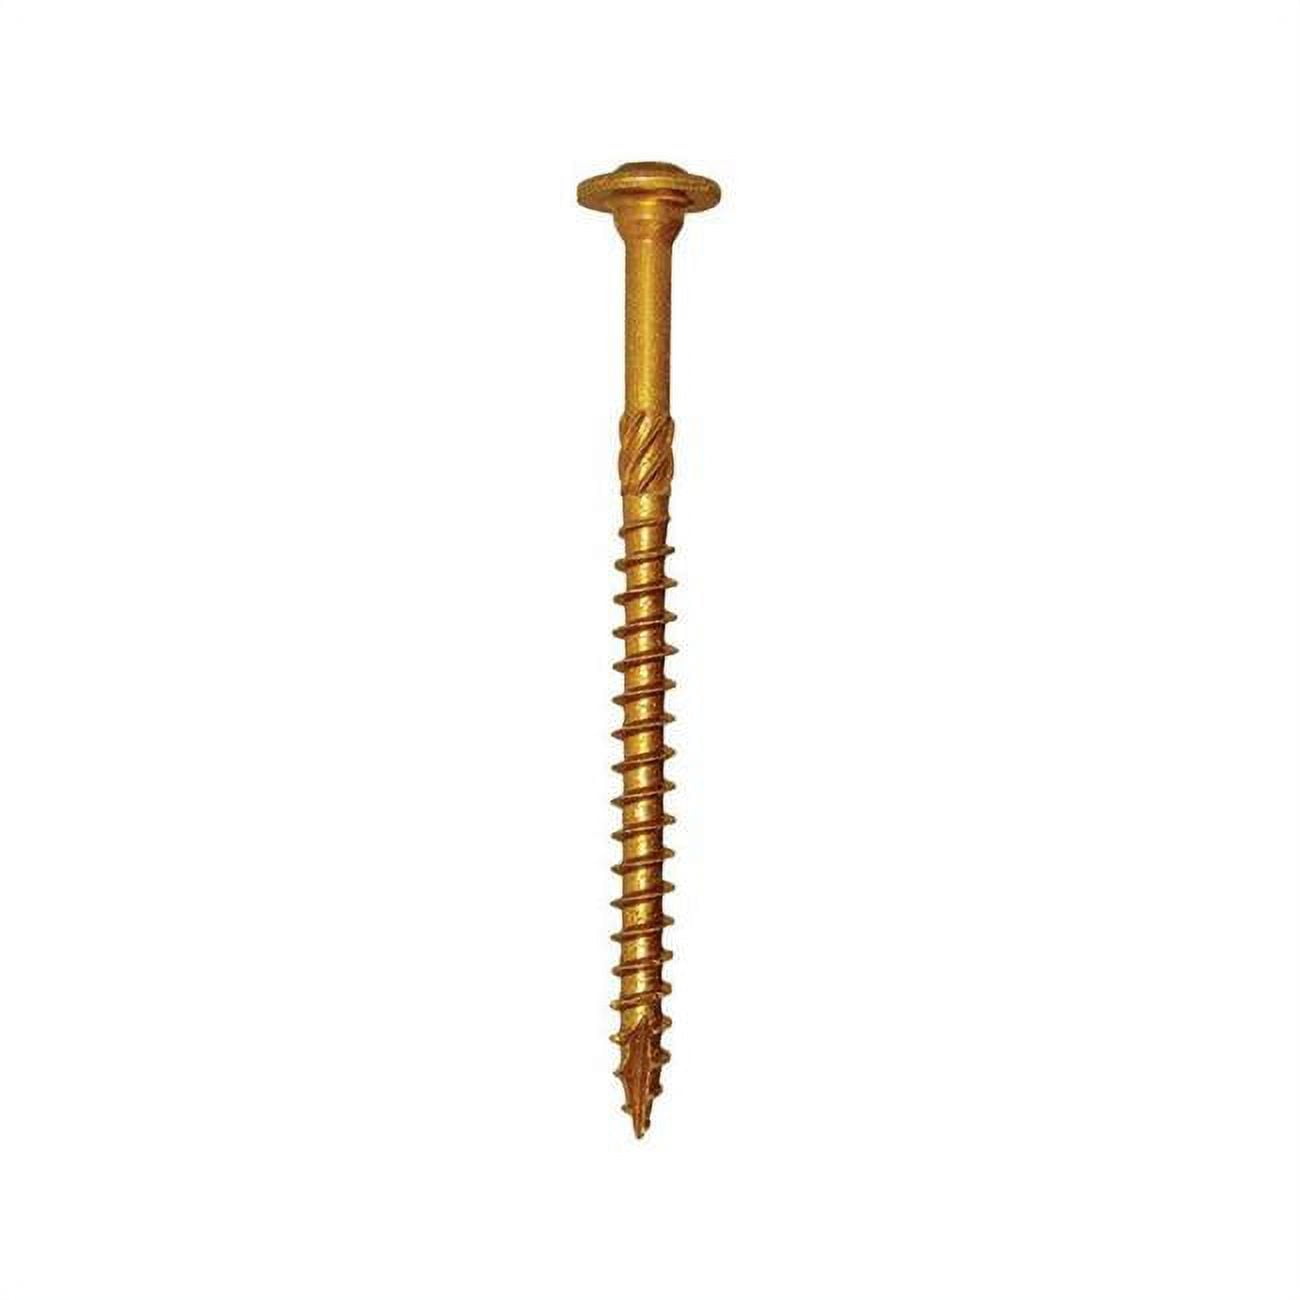 Picture of GRK Fasteners 5913264 Star Self Tapping 0.31 in. Dia. x 3.5 in. Yellow Zinc Construction Screws